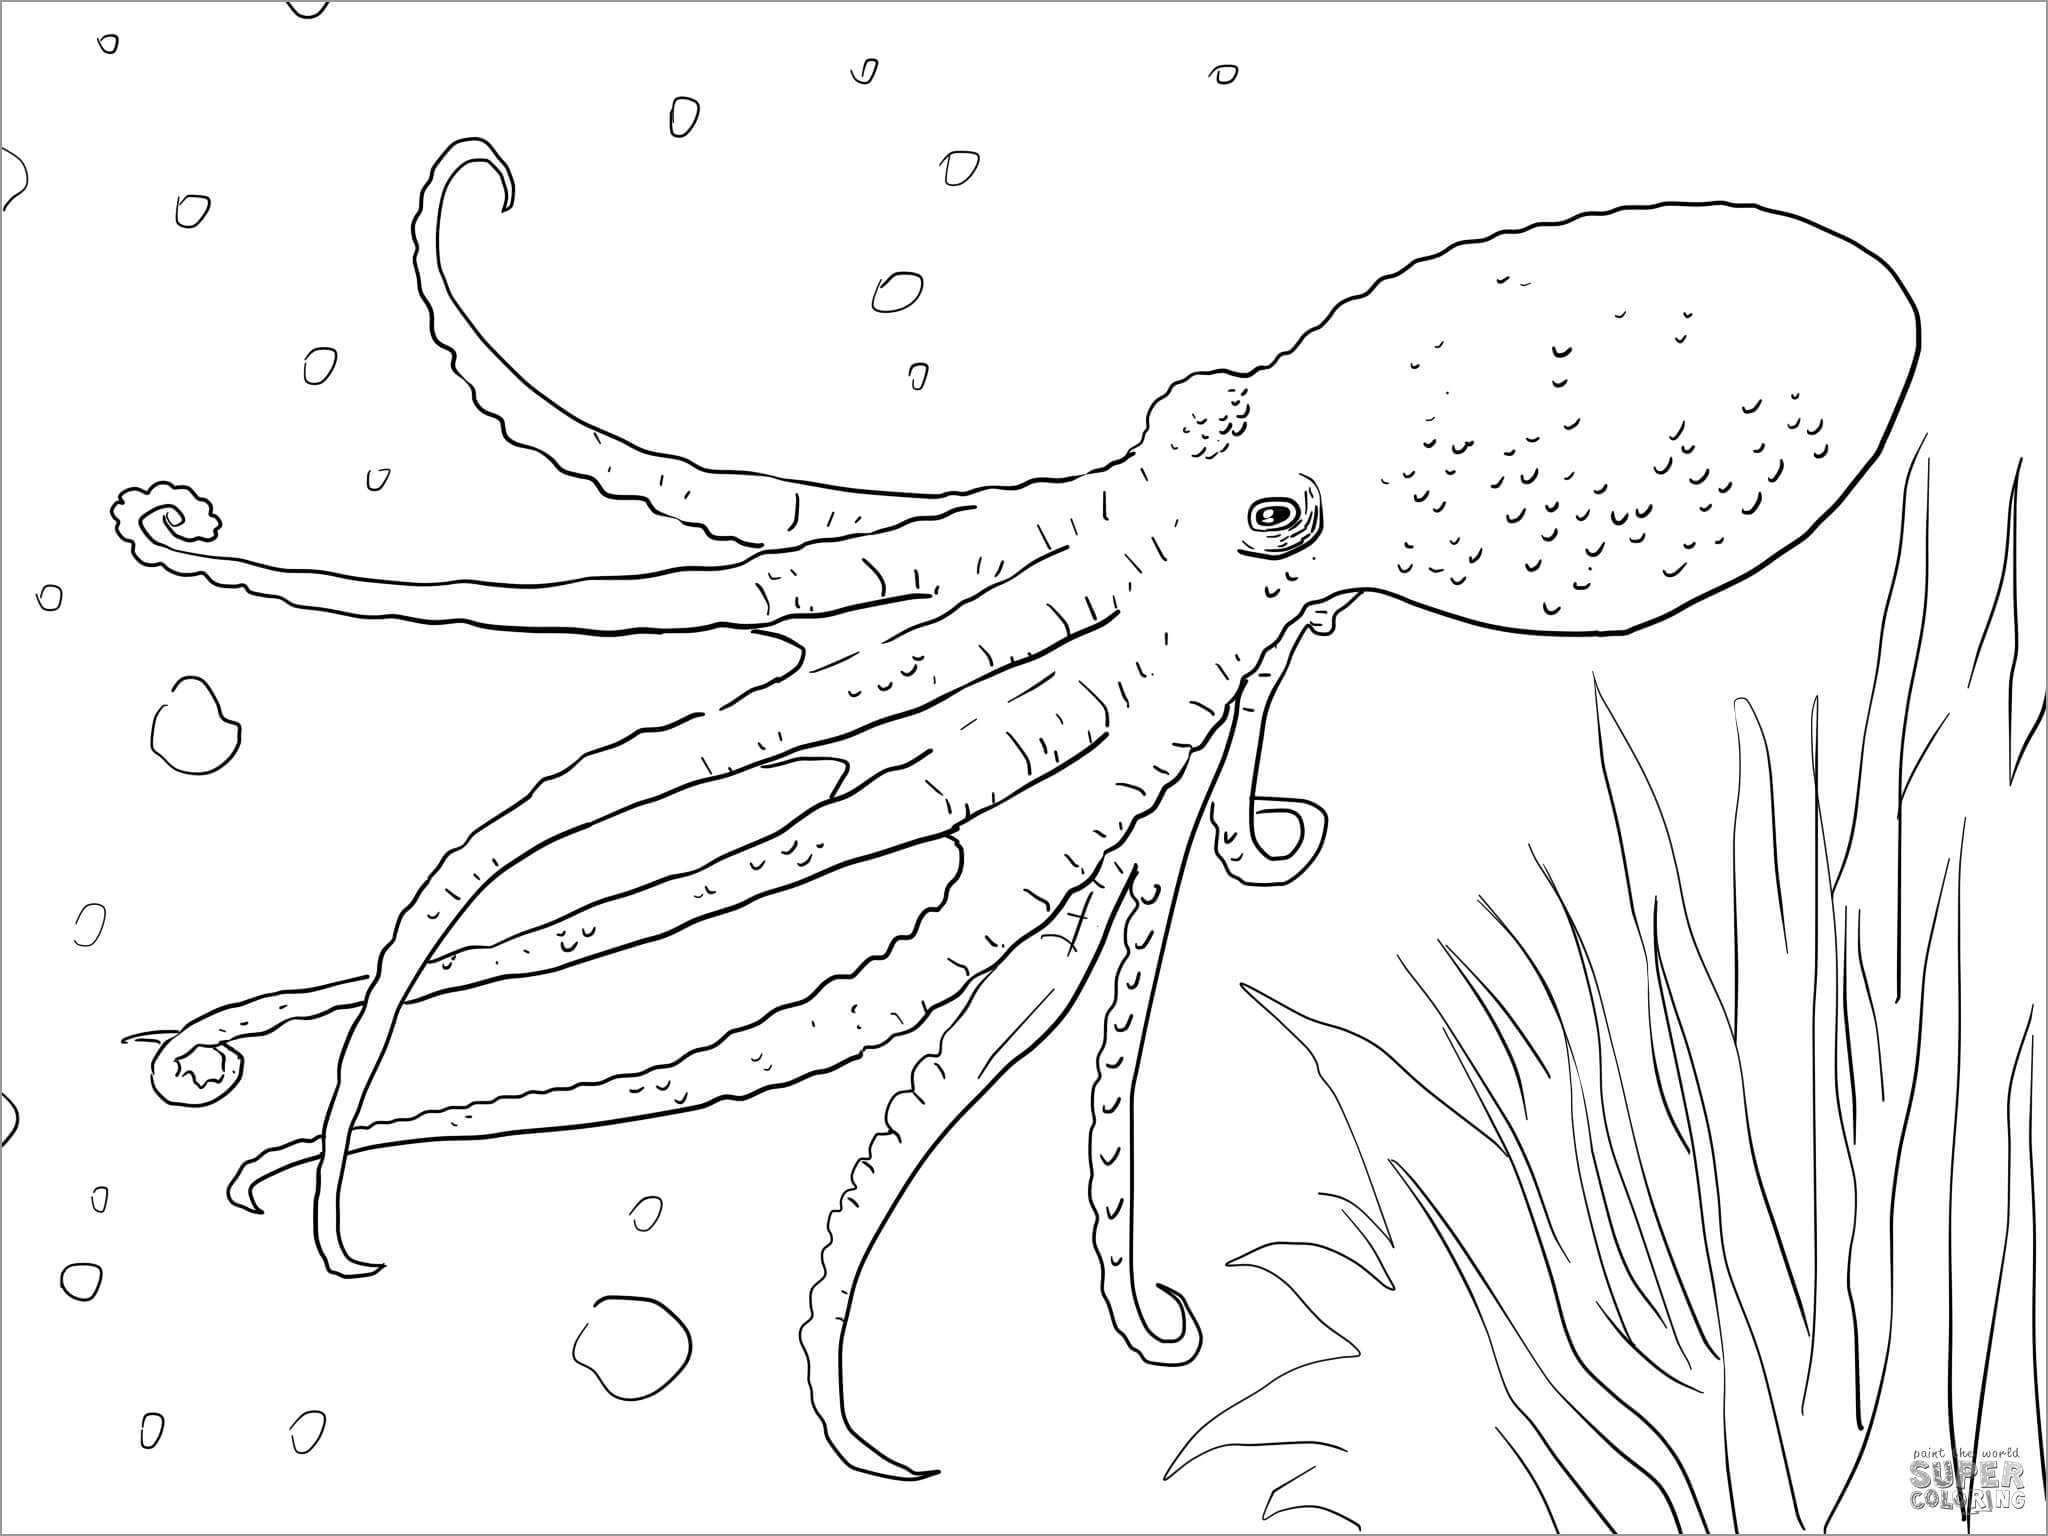 Musky Octopus Coloring Page